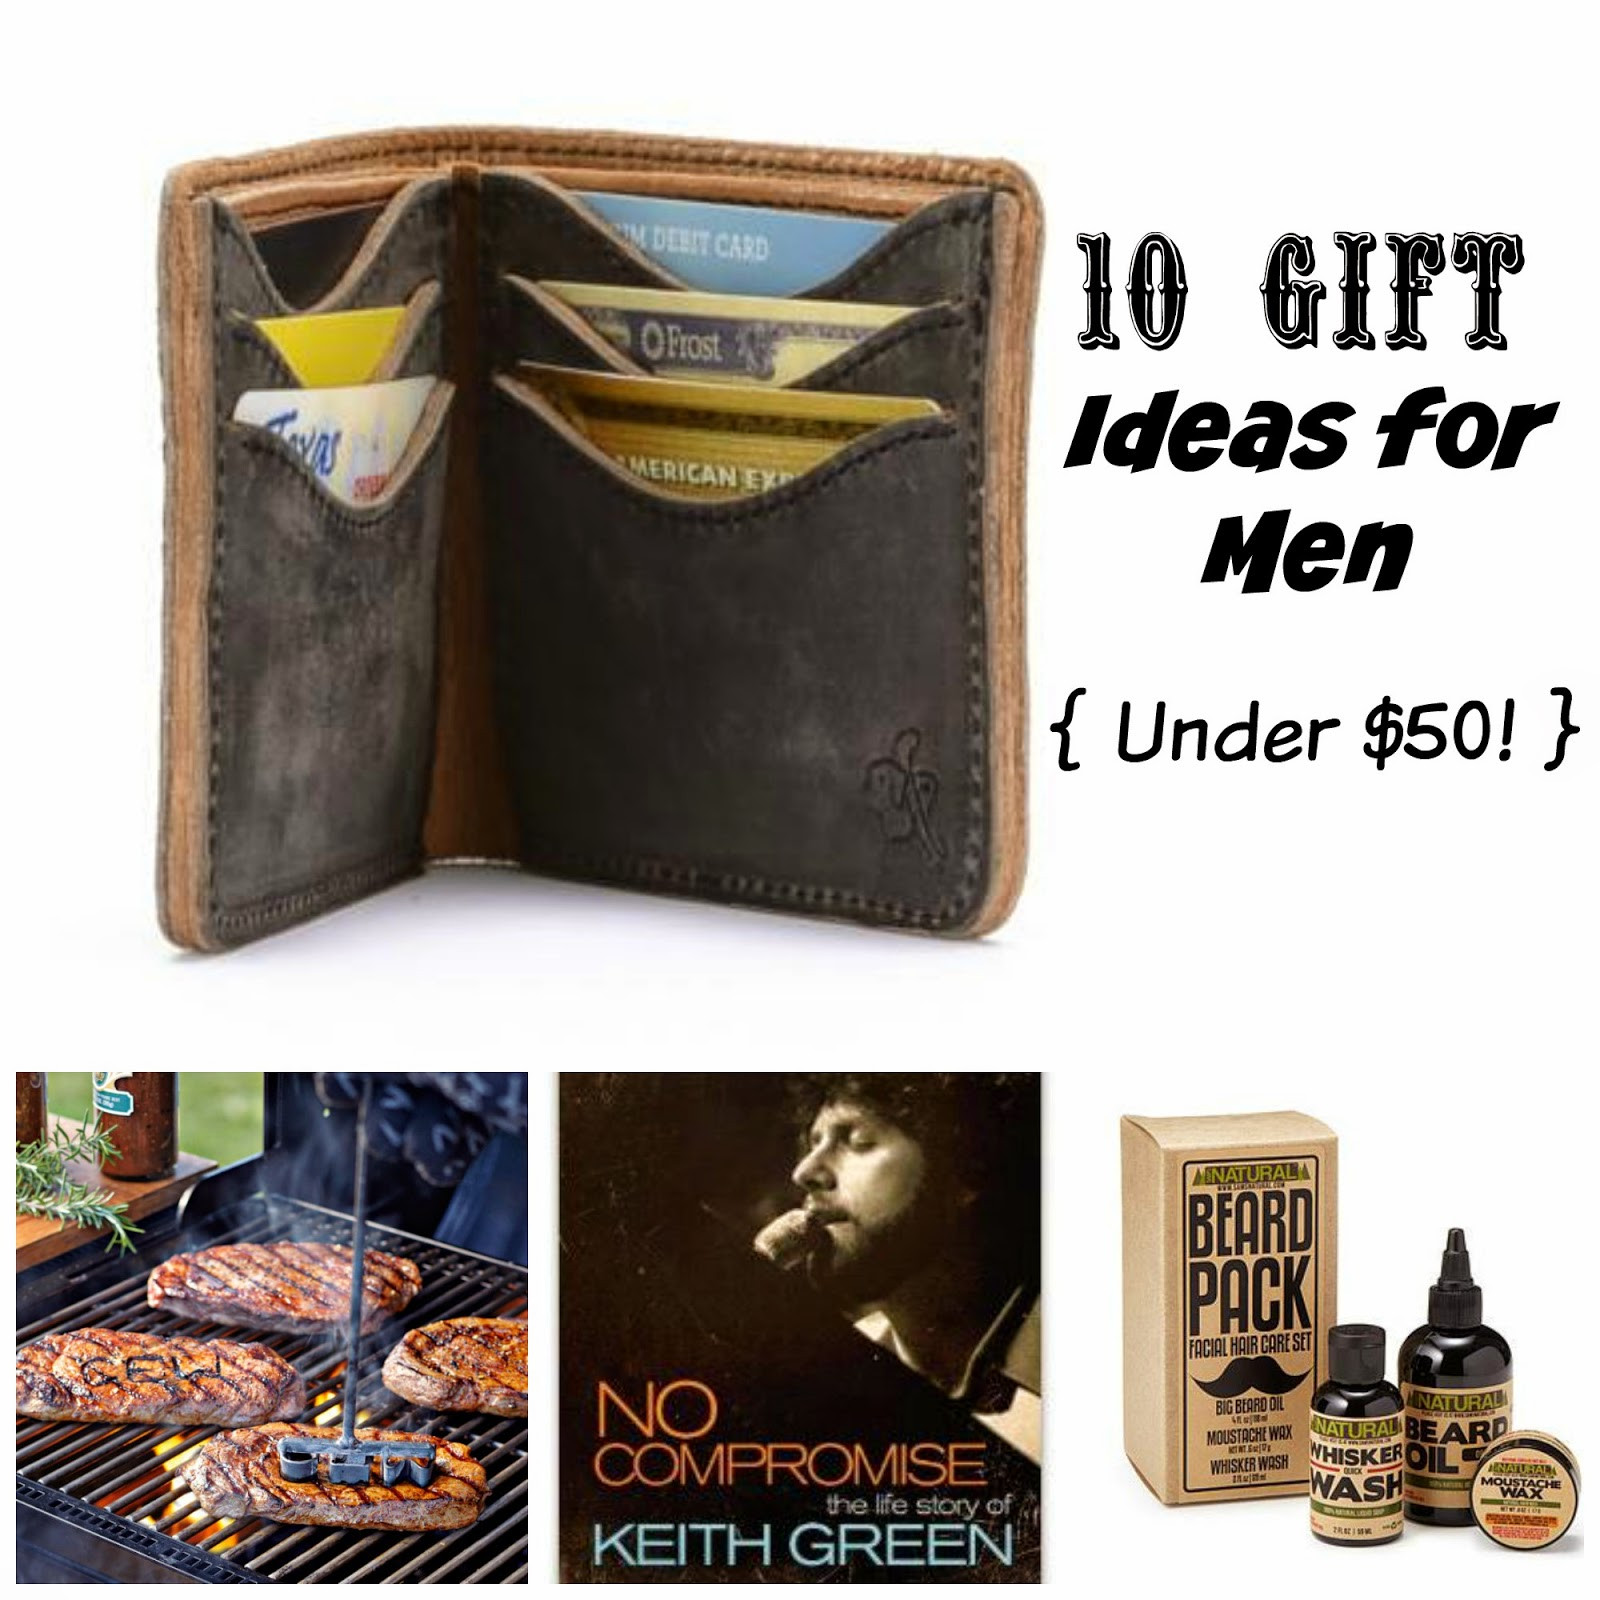 Christmas Gift Ideas For Couples Under 50
 Where Joy Is 10 Gift Ideas for Men Under $50